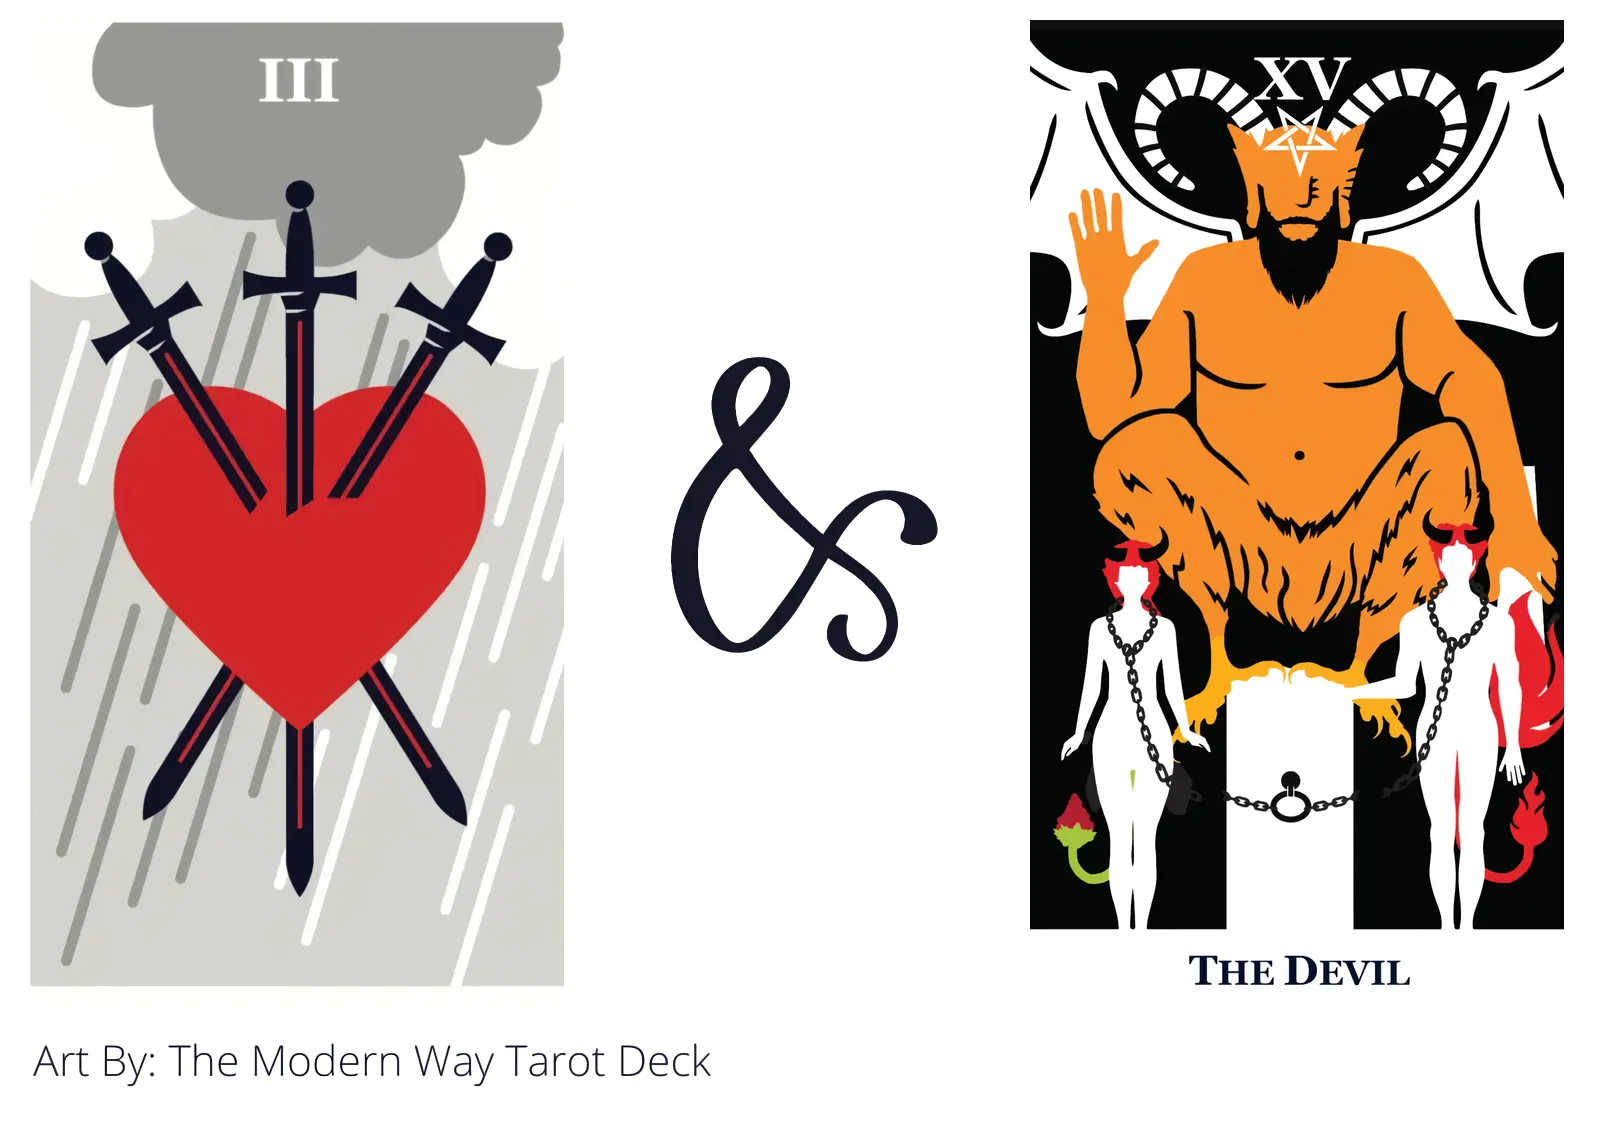 three of swords and the devil tarot cards together